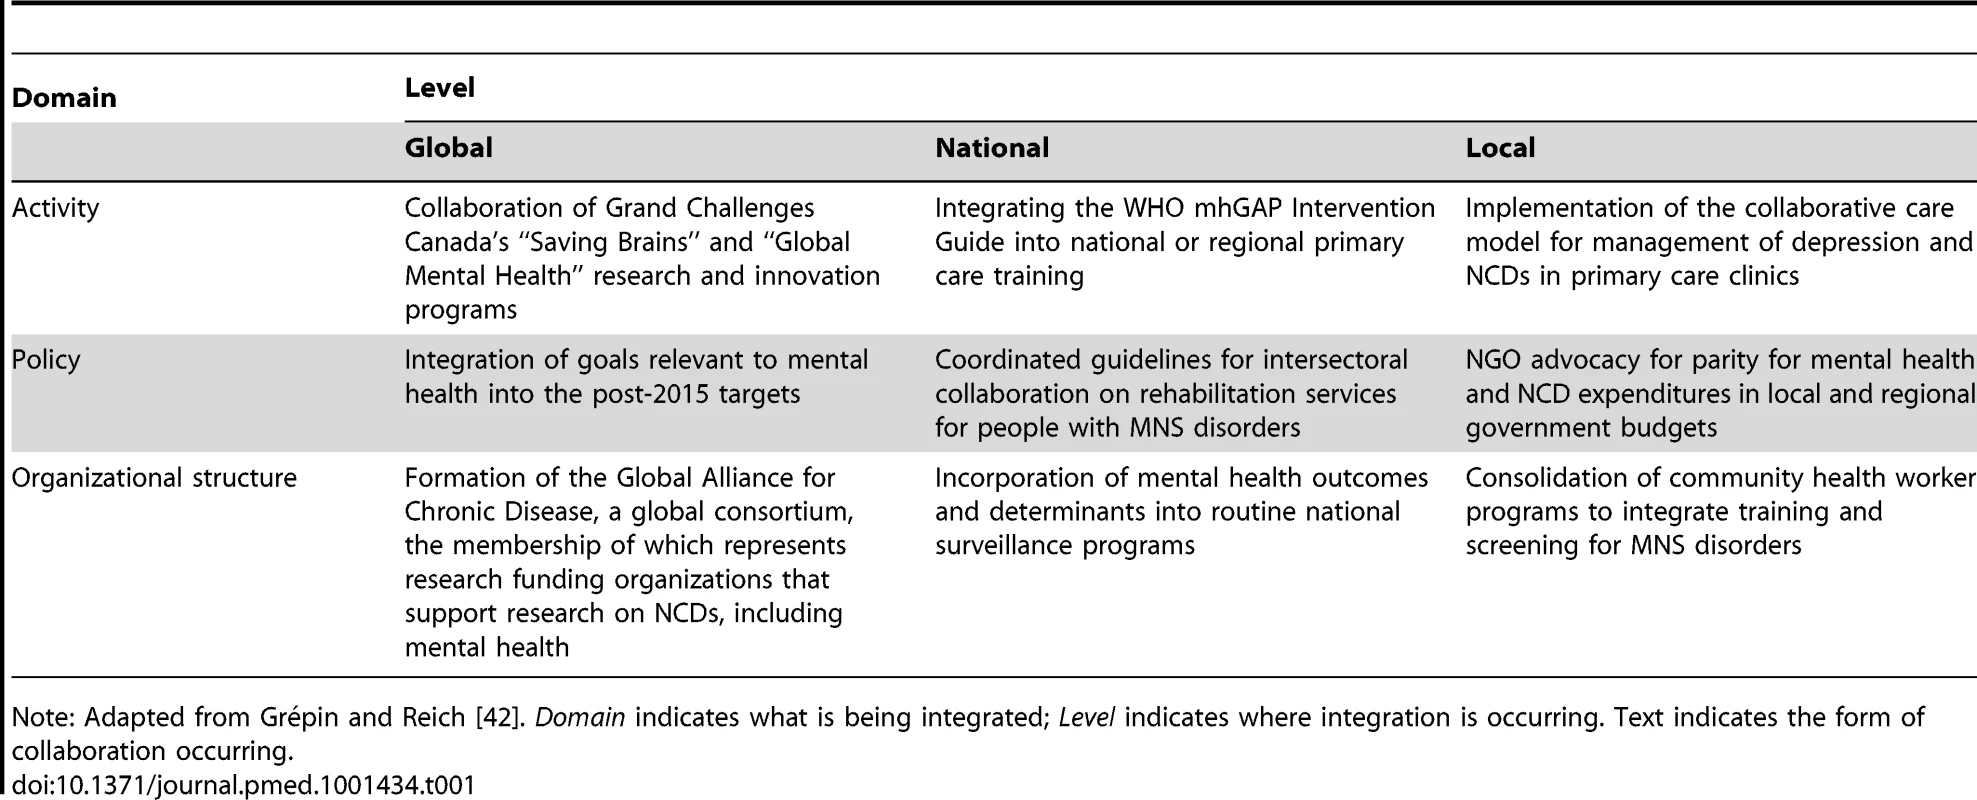 Operationalizing integration: Examples of activity, policy, and organizational integration that link MNS research and care to other health-related programs.